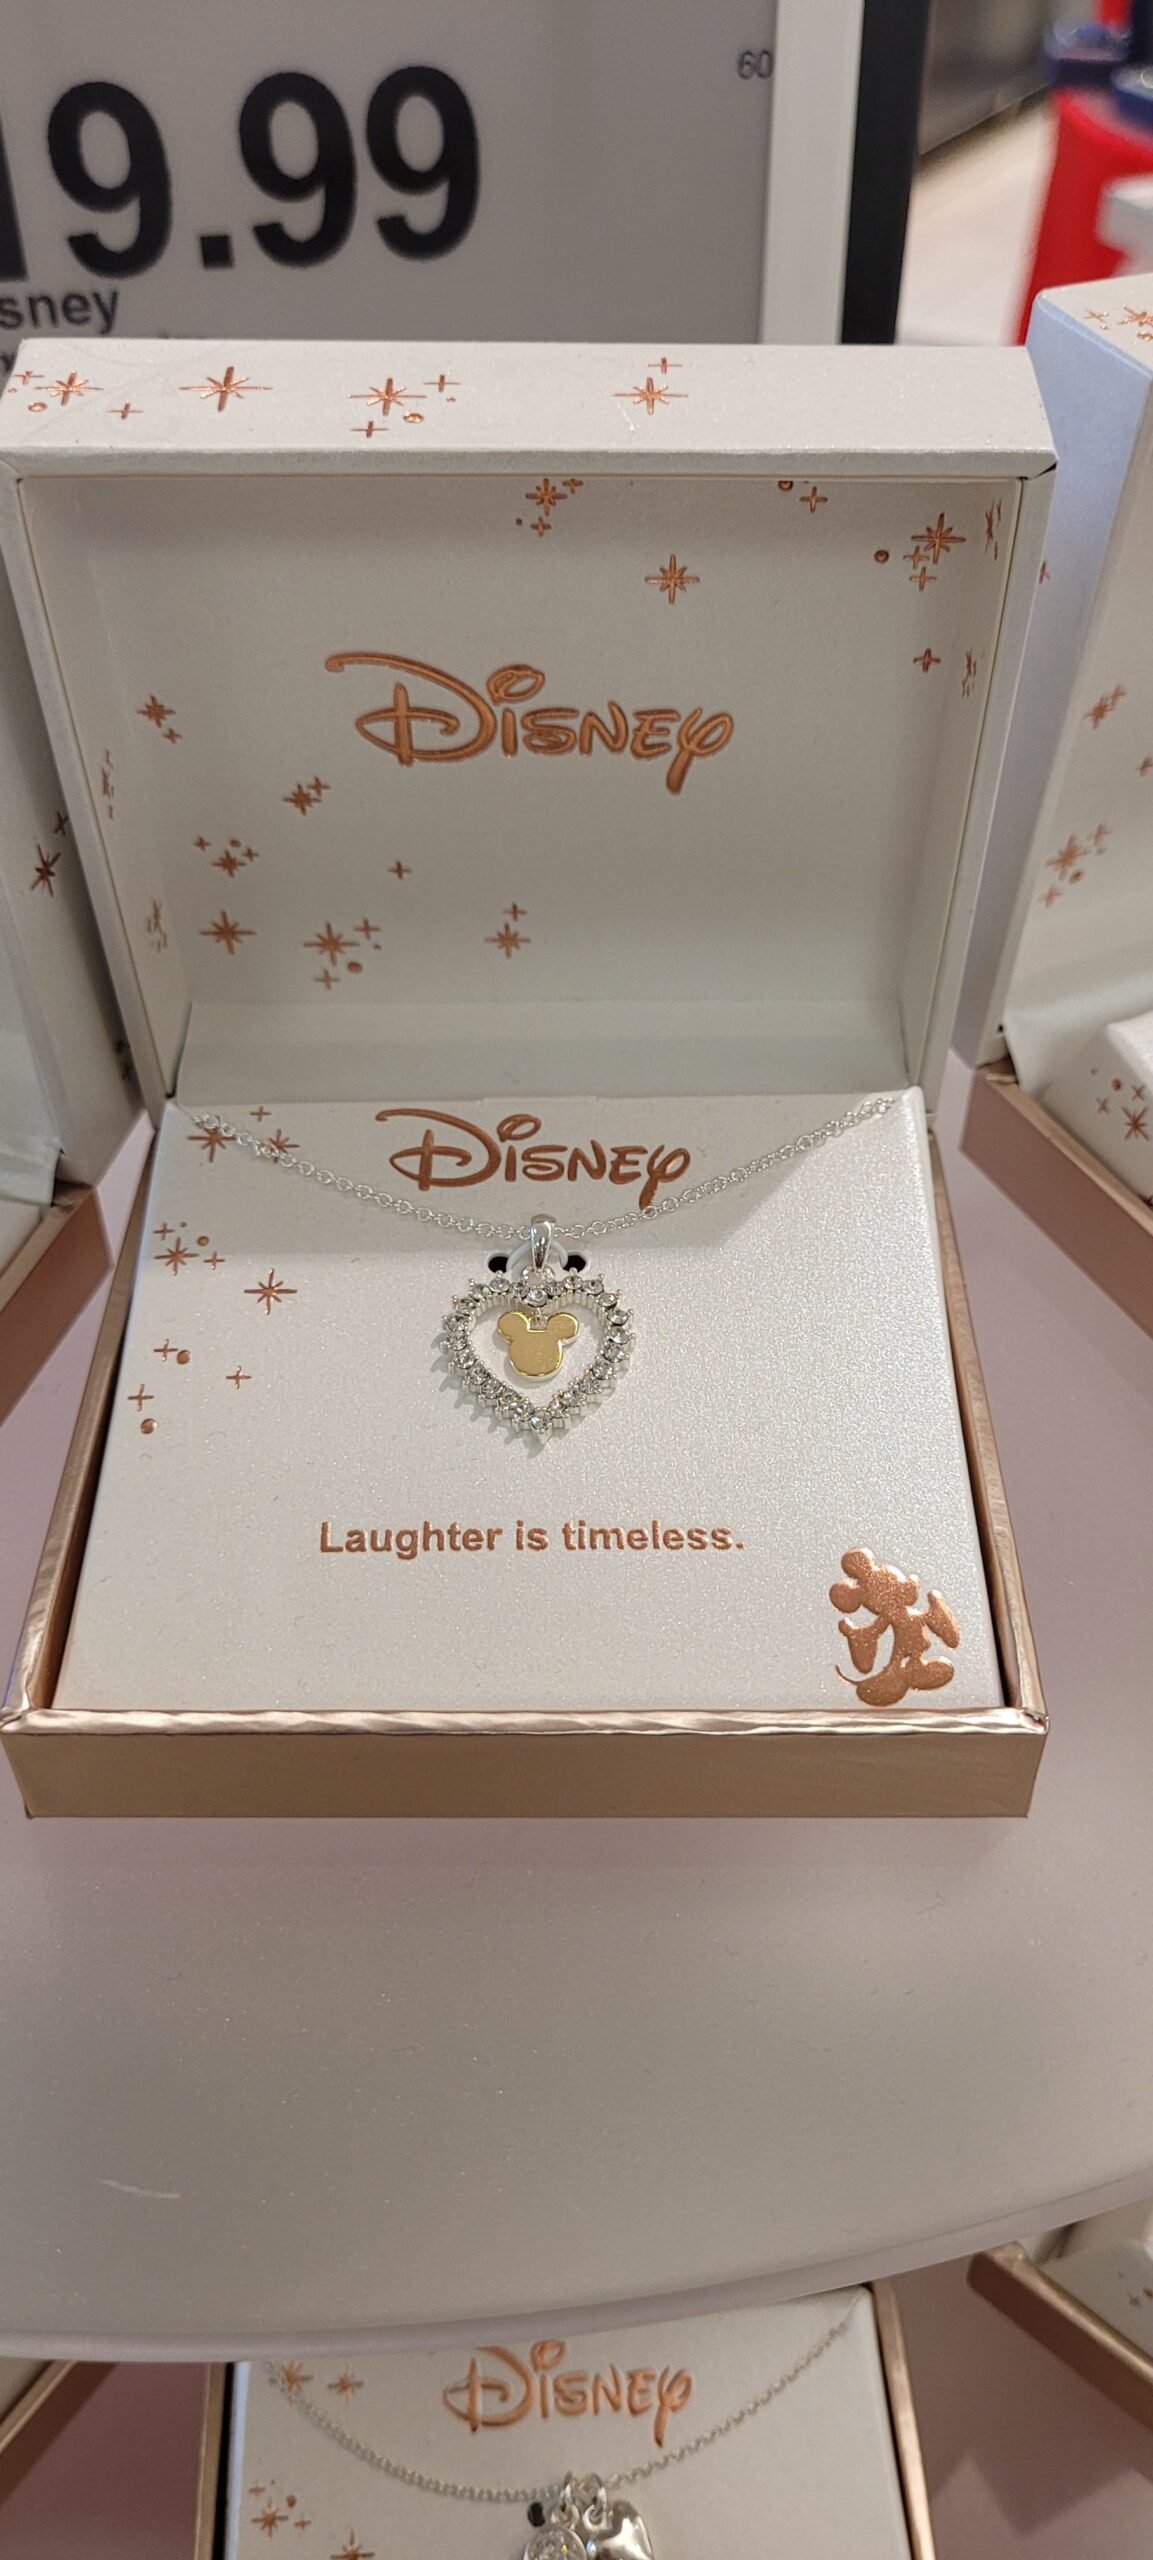 Shimmering Disney Jewelry From Kohl's Add A Touch of Sparkle